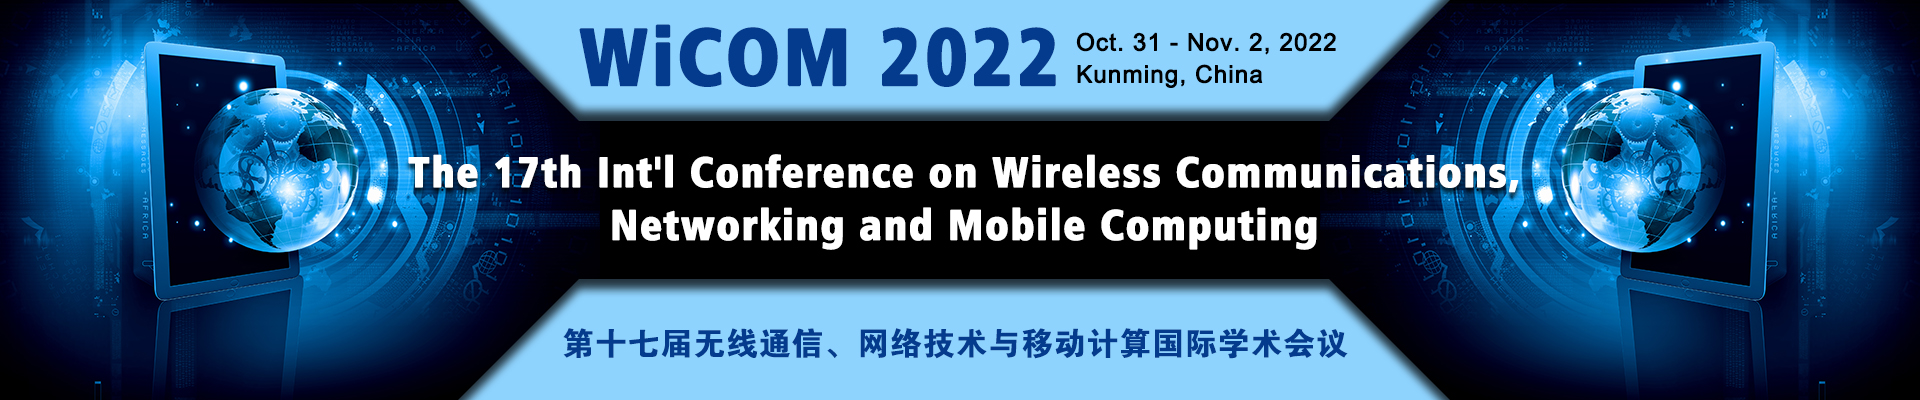 The 17th International Conference on Wireless Communications, Networking and Mobile Computing (WiCOM 2022), Online Event